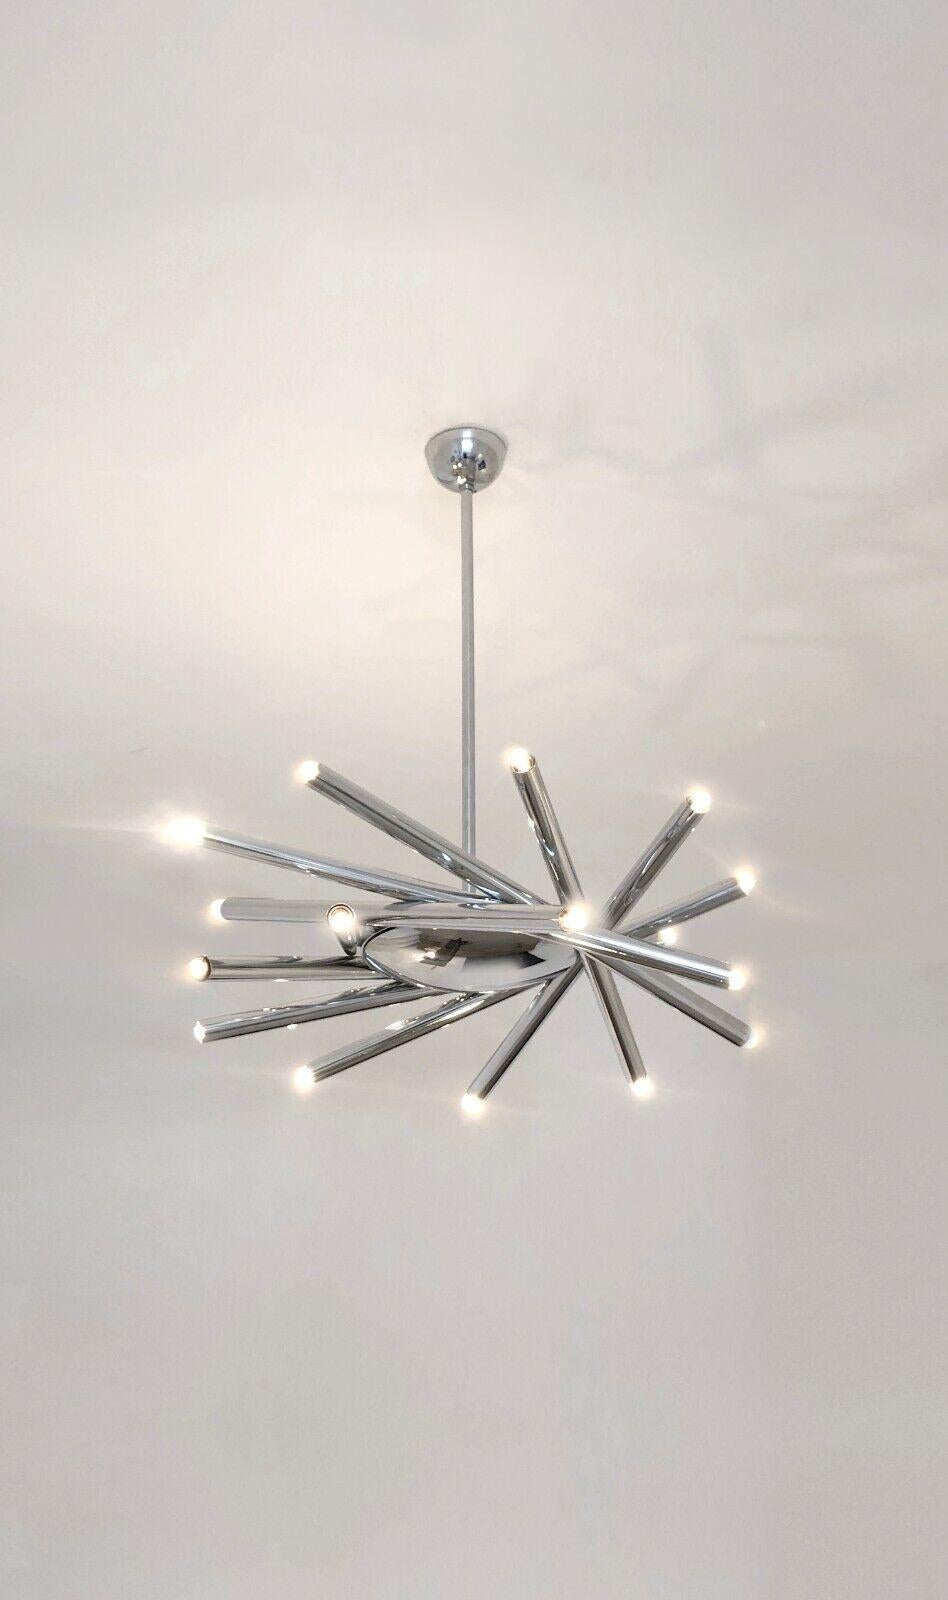 Late 20th Century A 18-Lights RADICAL SPACE-AGE POST-MODERN CEILING FIXTURE by STILNOVO Italy 1970 For Sale